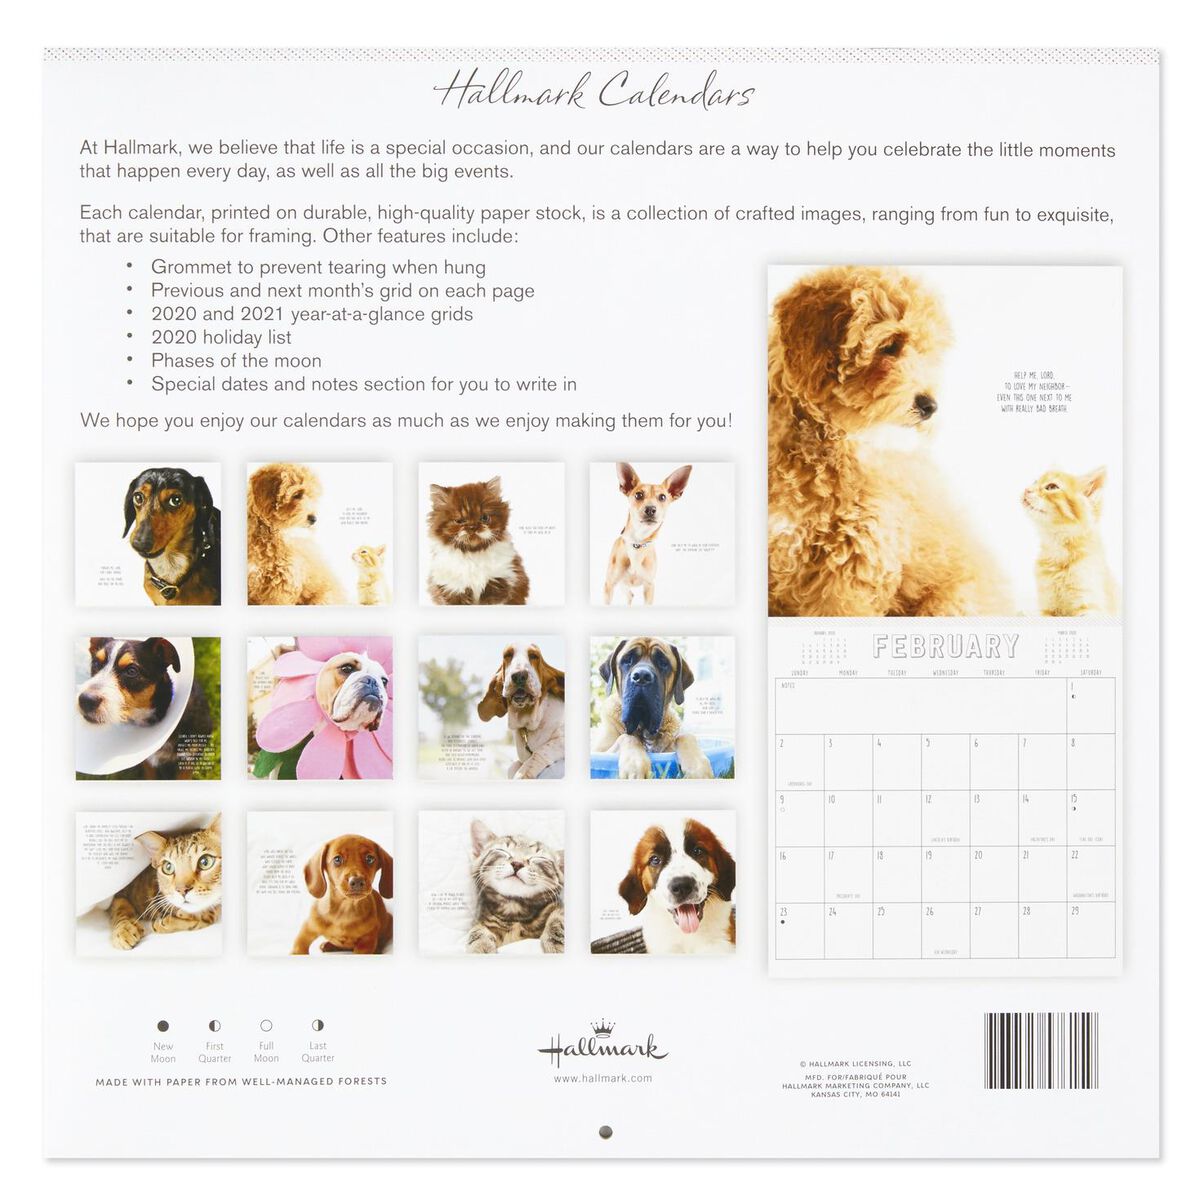 pet-prayers-funny-pleas-and-praise-from-our-animal-friends-2020-wall-calendar-12-month